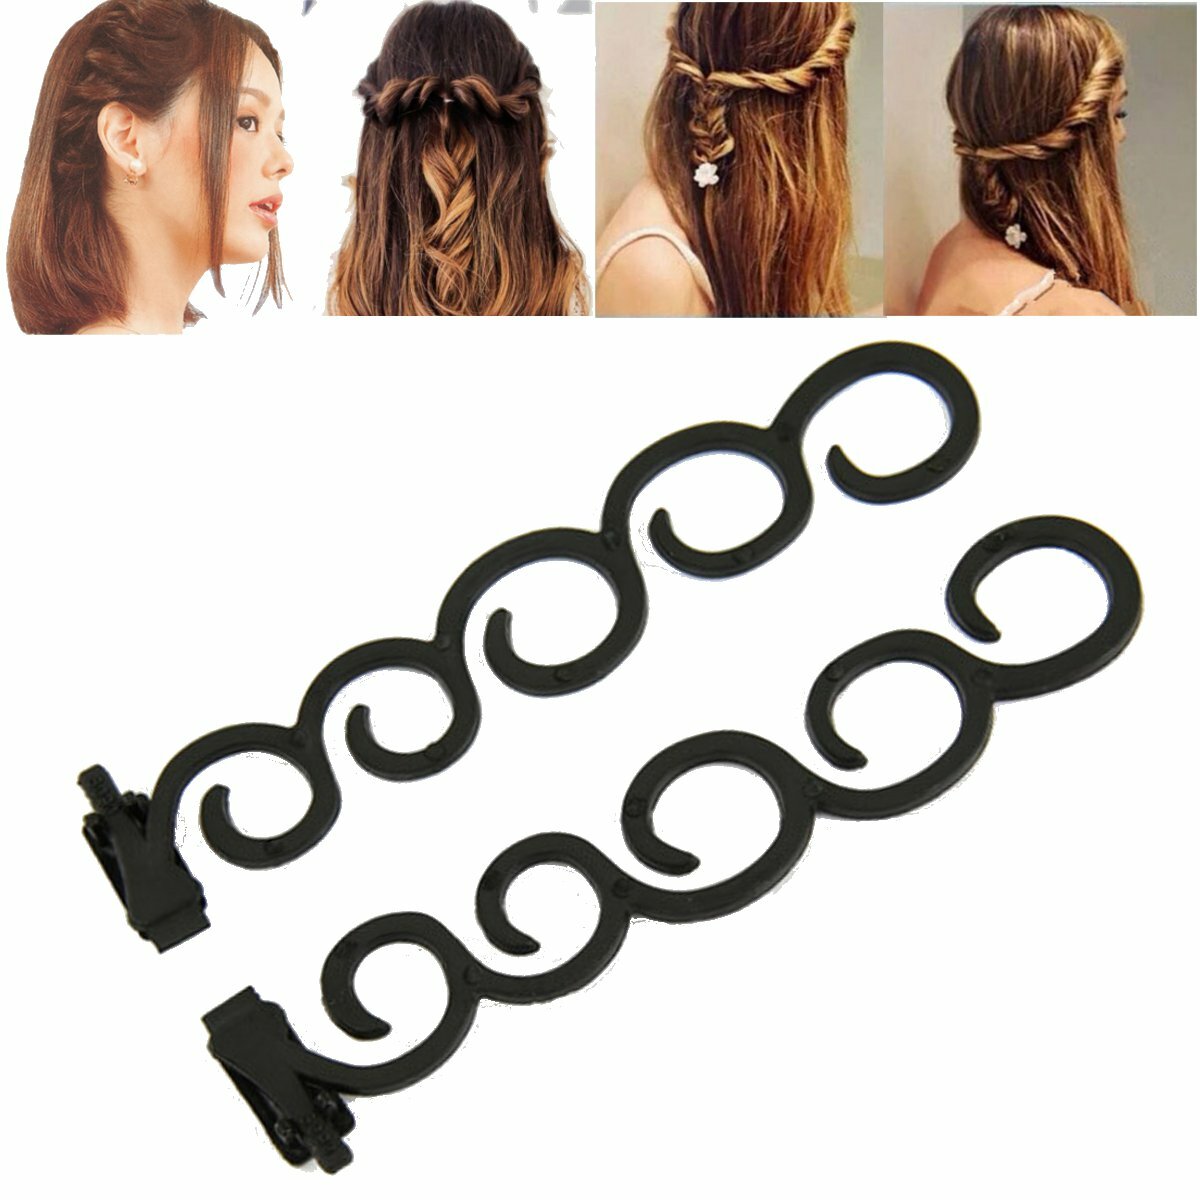 Waterfall Twist Roller Back Hair Styling Clip Stick Bun Maker Braid Tool  Hair Accessories Sale - Banggood USA-arrival notice-arrival notice